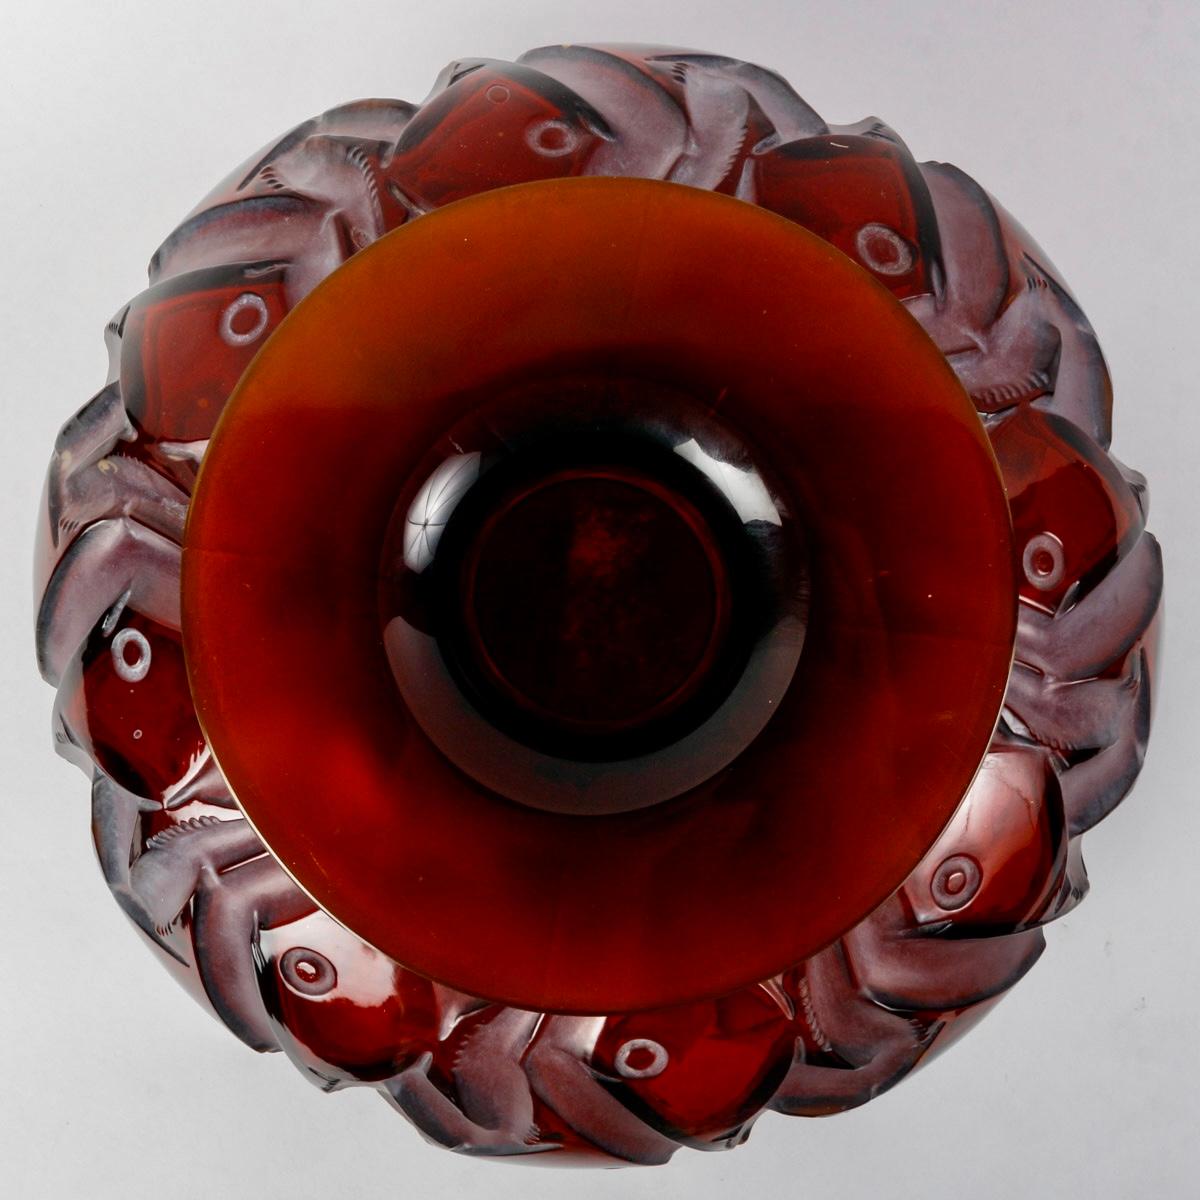 Molded 1928 Rene Lalique - Vase Penthievre Red Amber Glass with White Patina